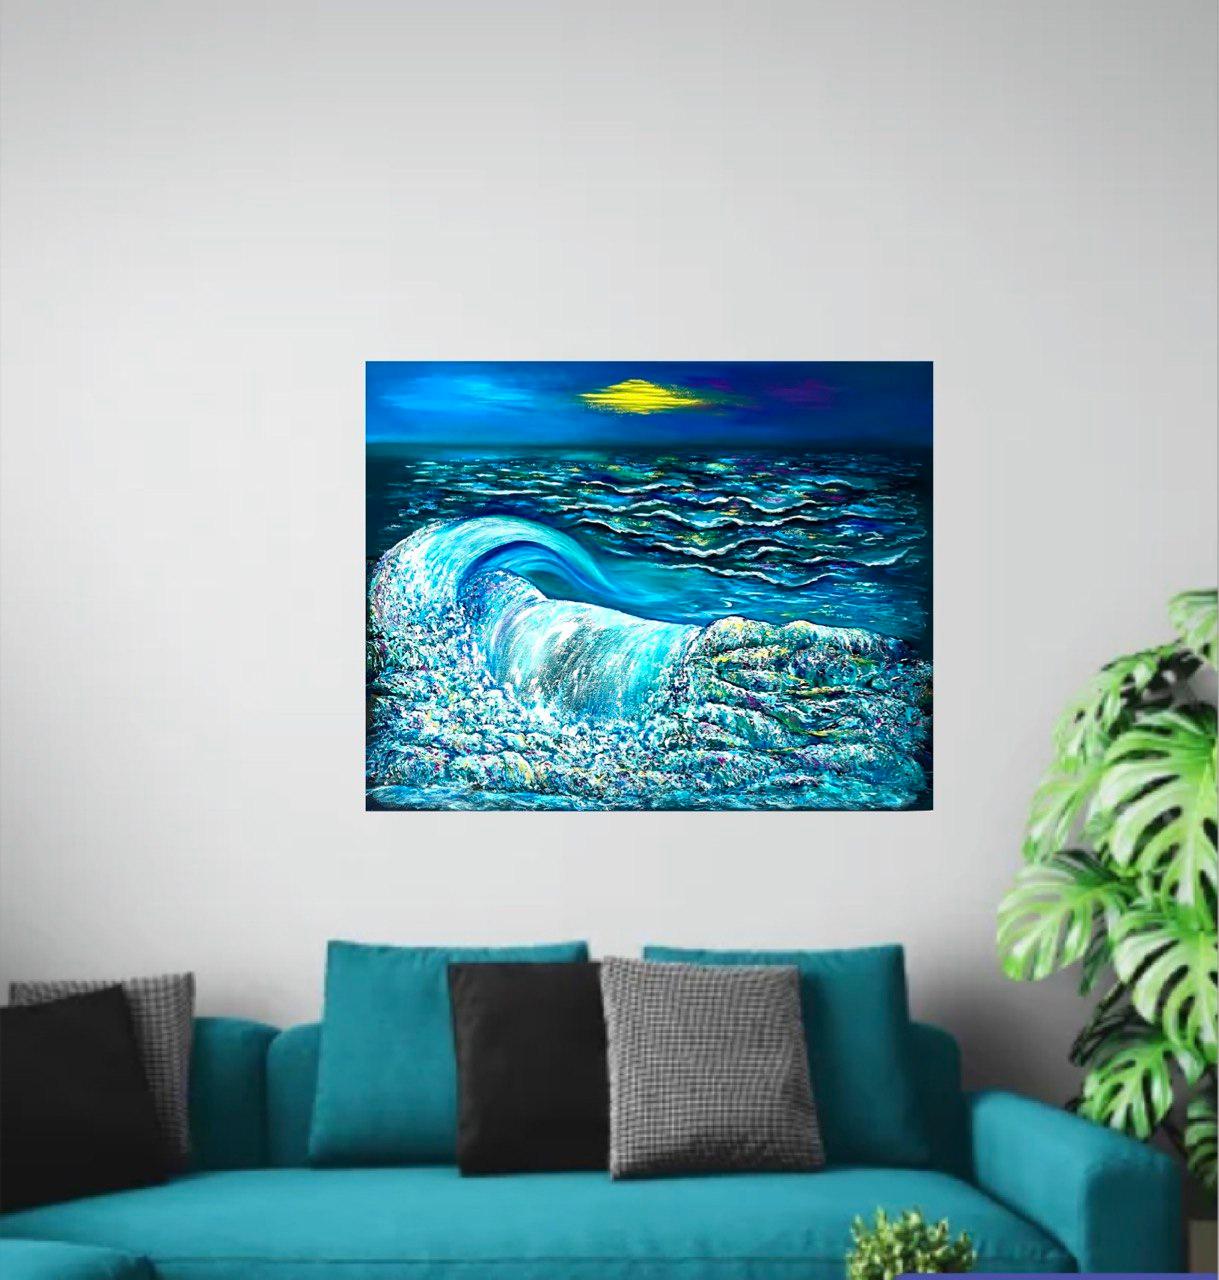  Peaceful Evening. Oil painting, Impressionist style. Sea / Waves / Water/ Moon. 10